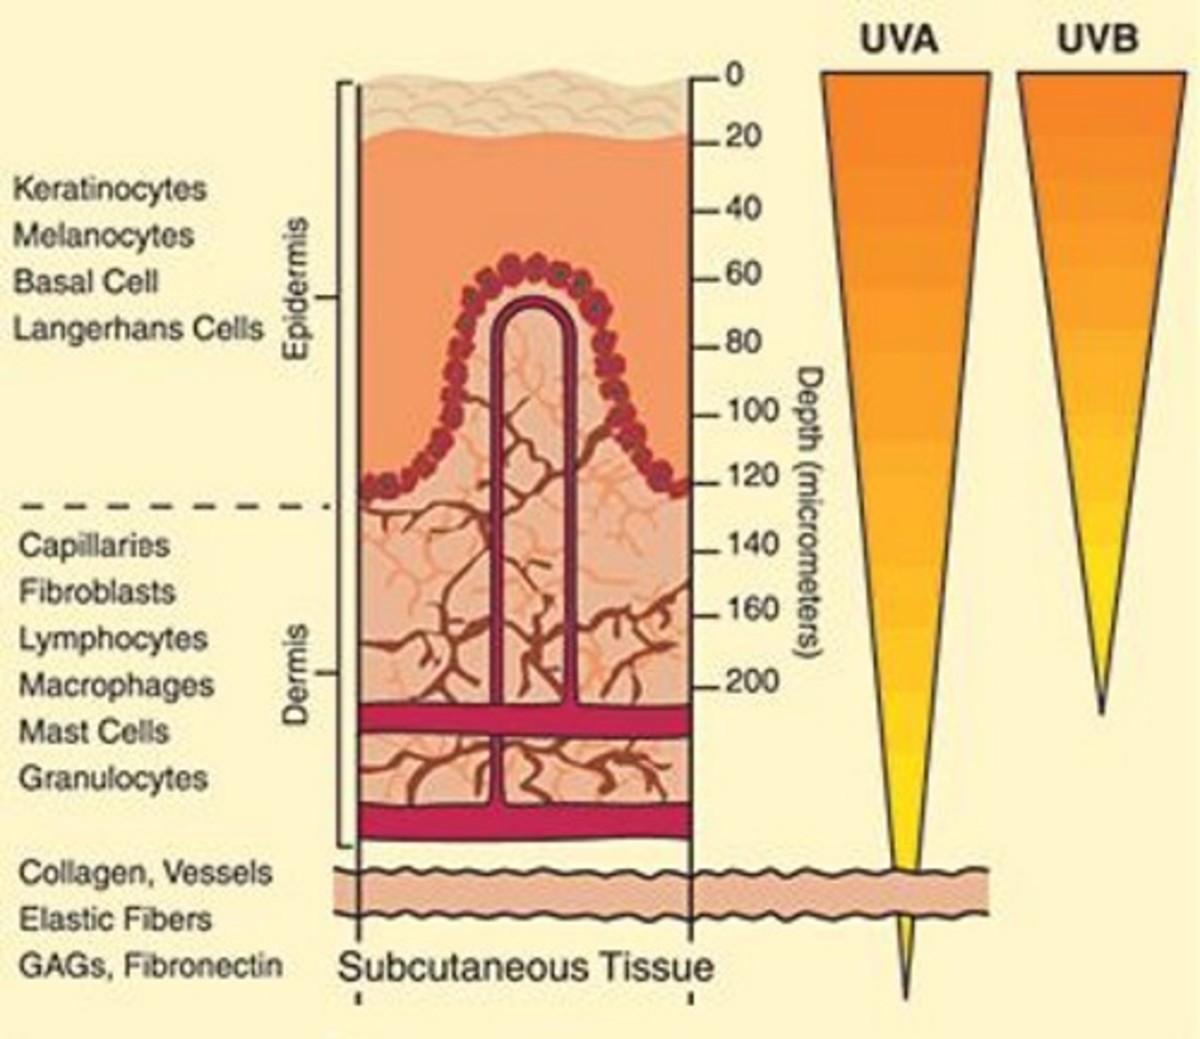 UV radiation affects cell differentiation